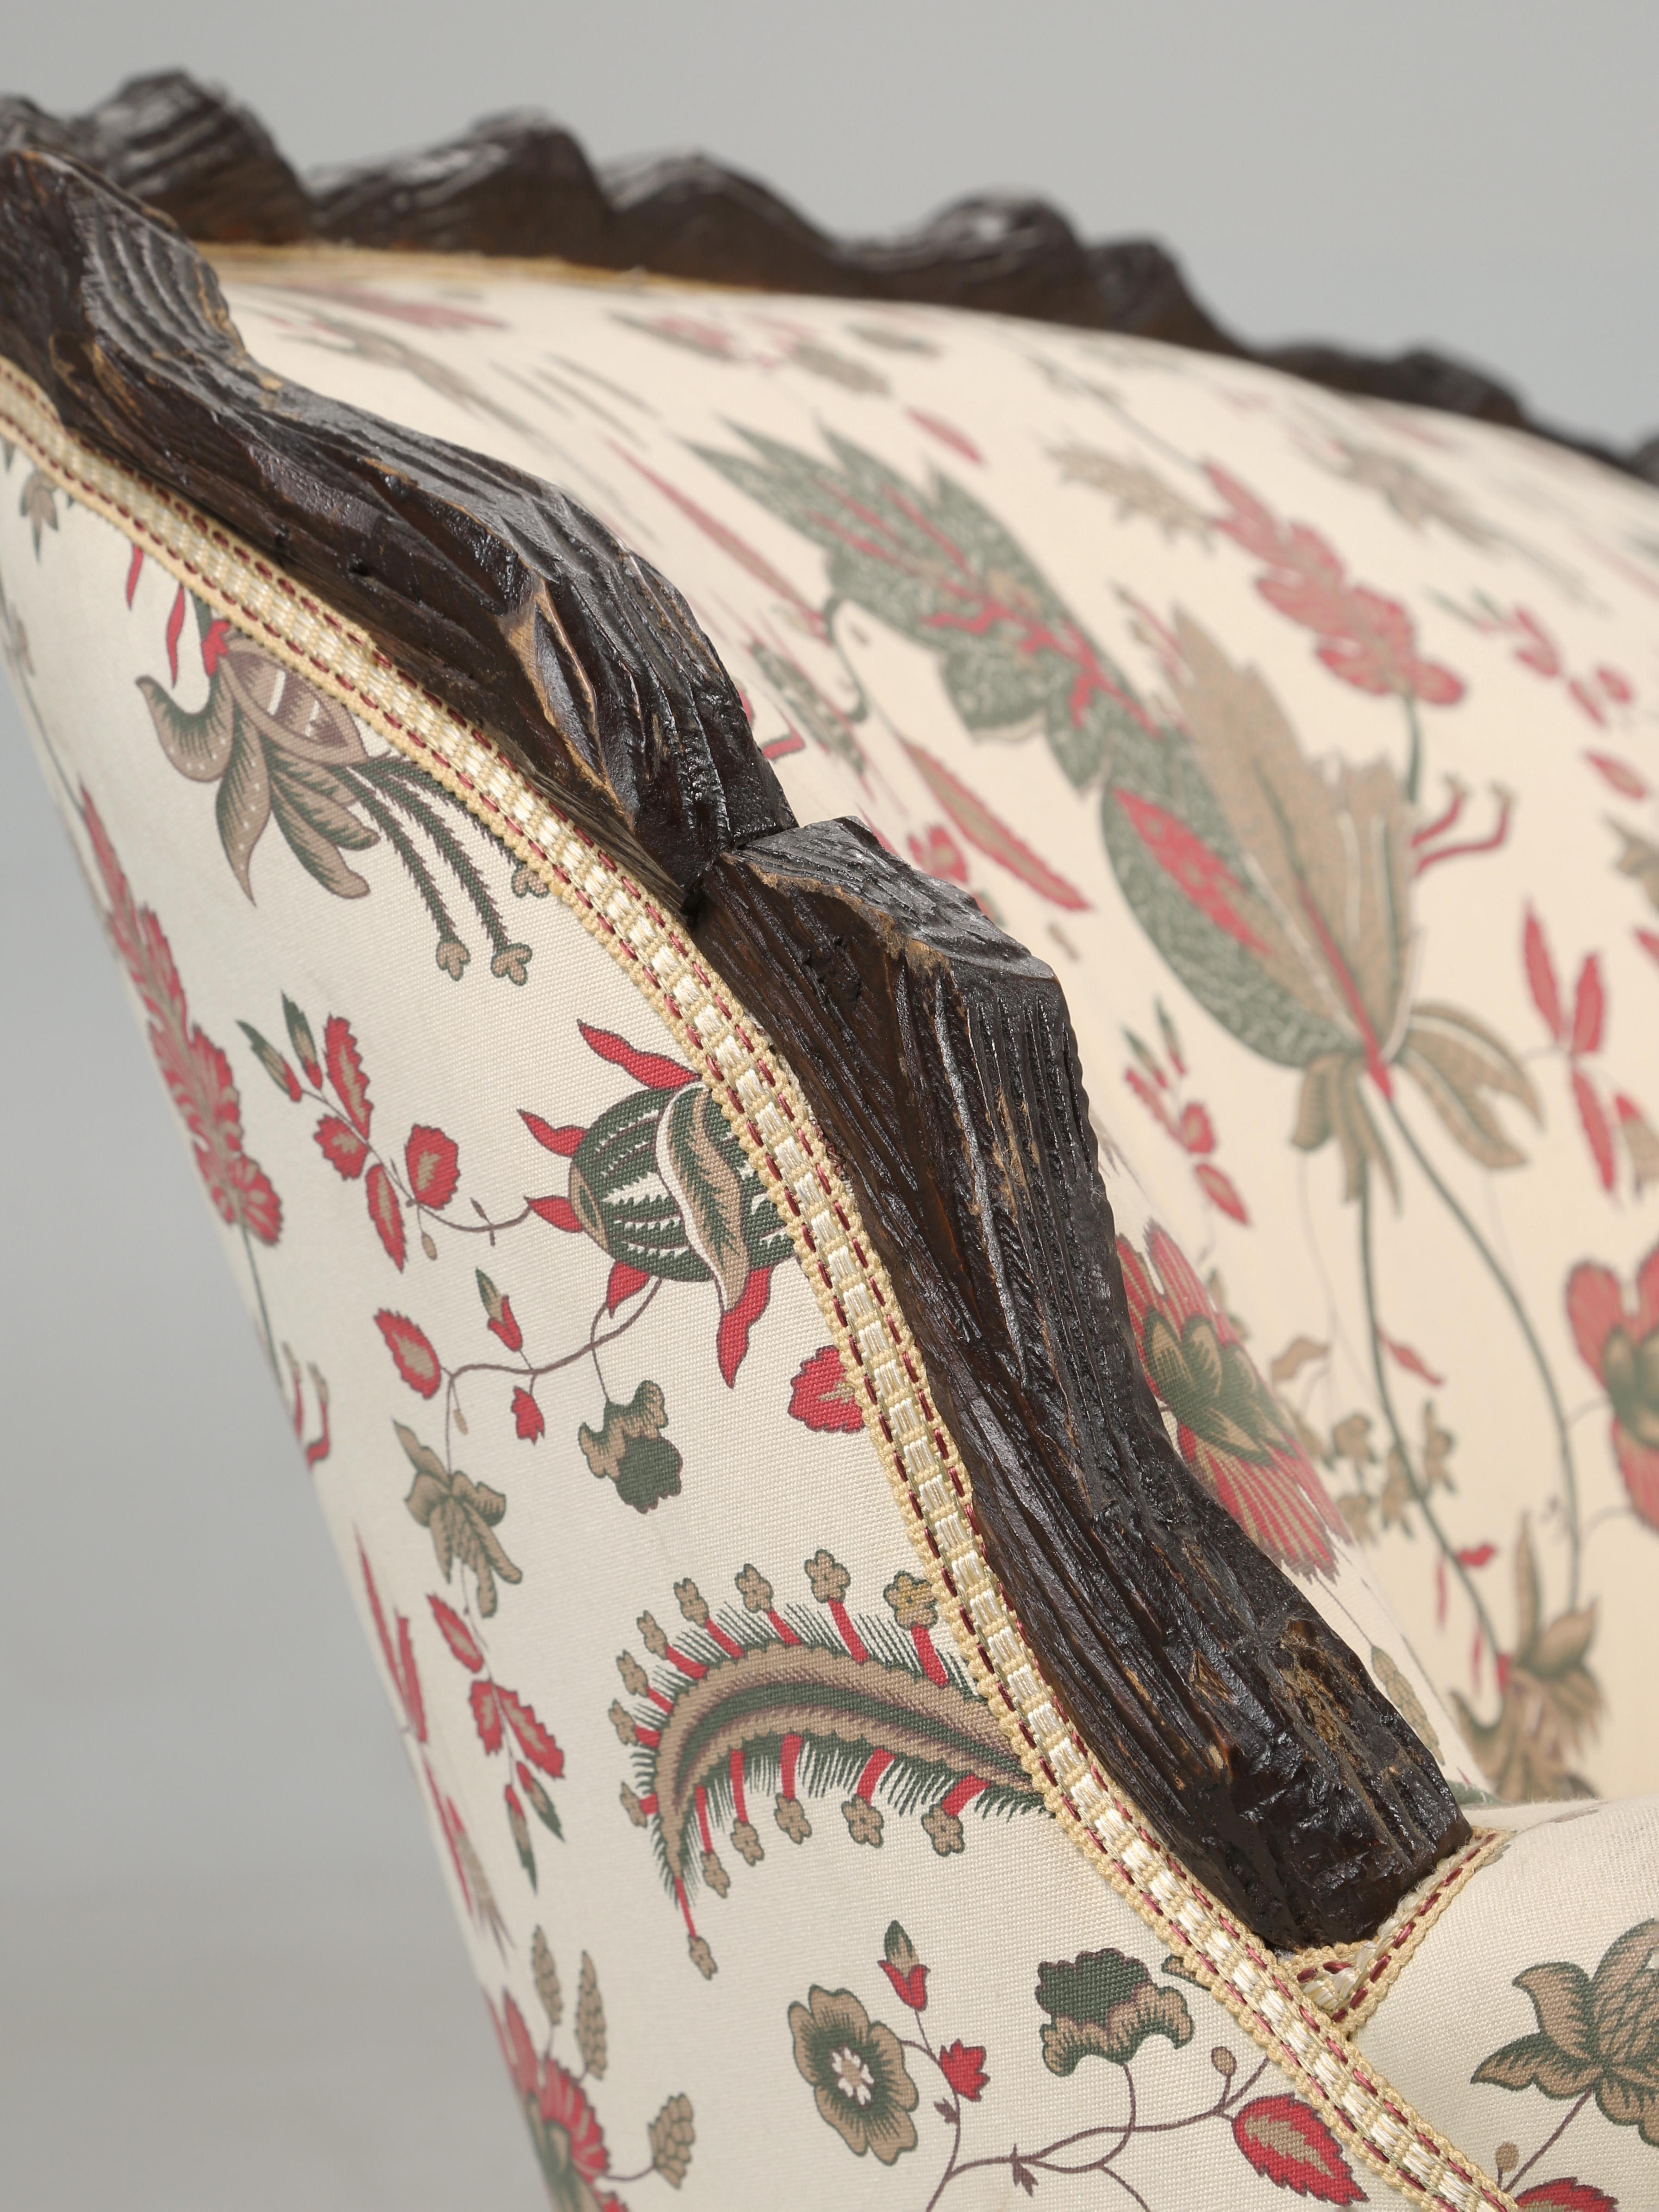 Upholstery Antique Black Forest Sofa from French Chateau in the South of France, Restored For Sale